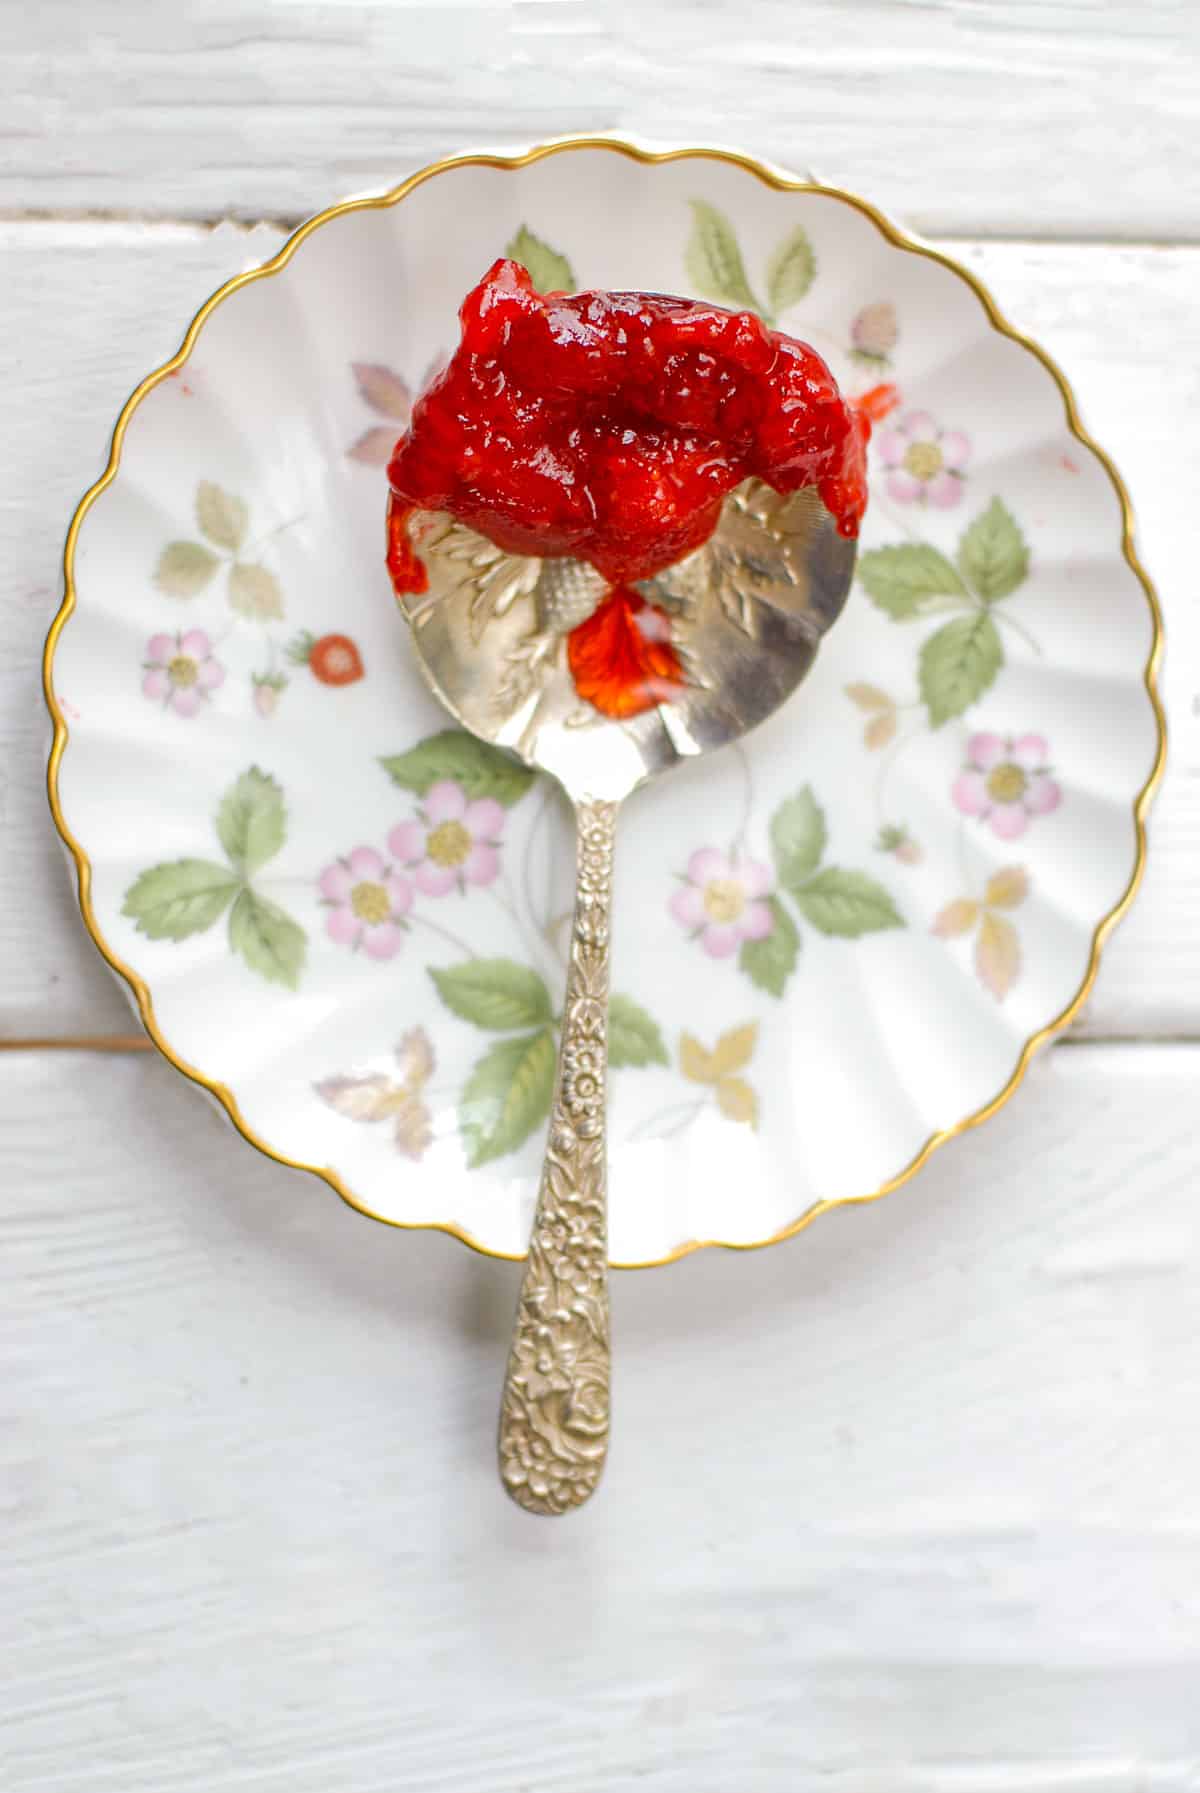 homemade strawberry jamon antique spoon and plate